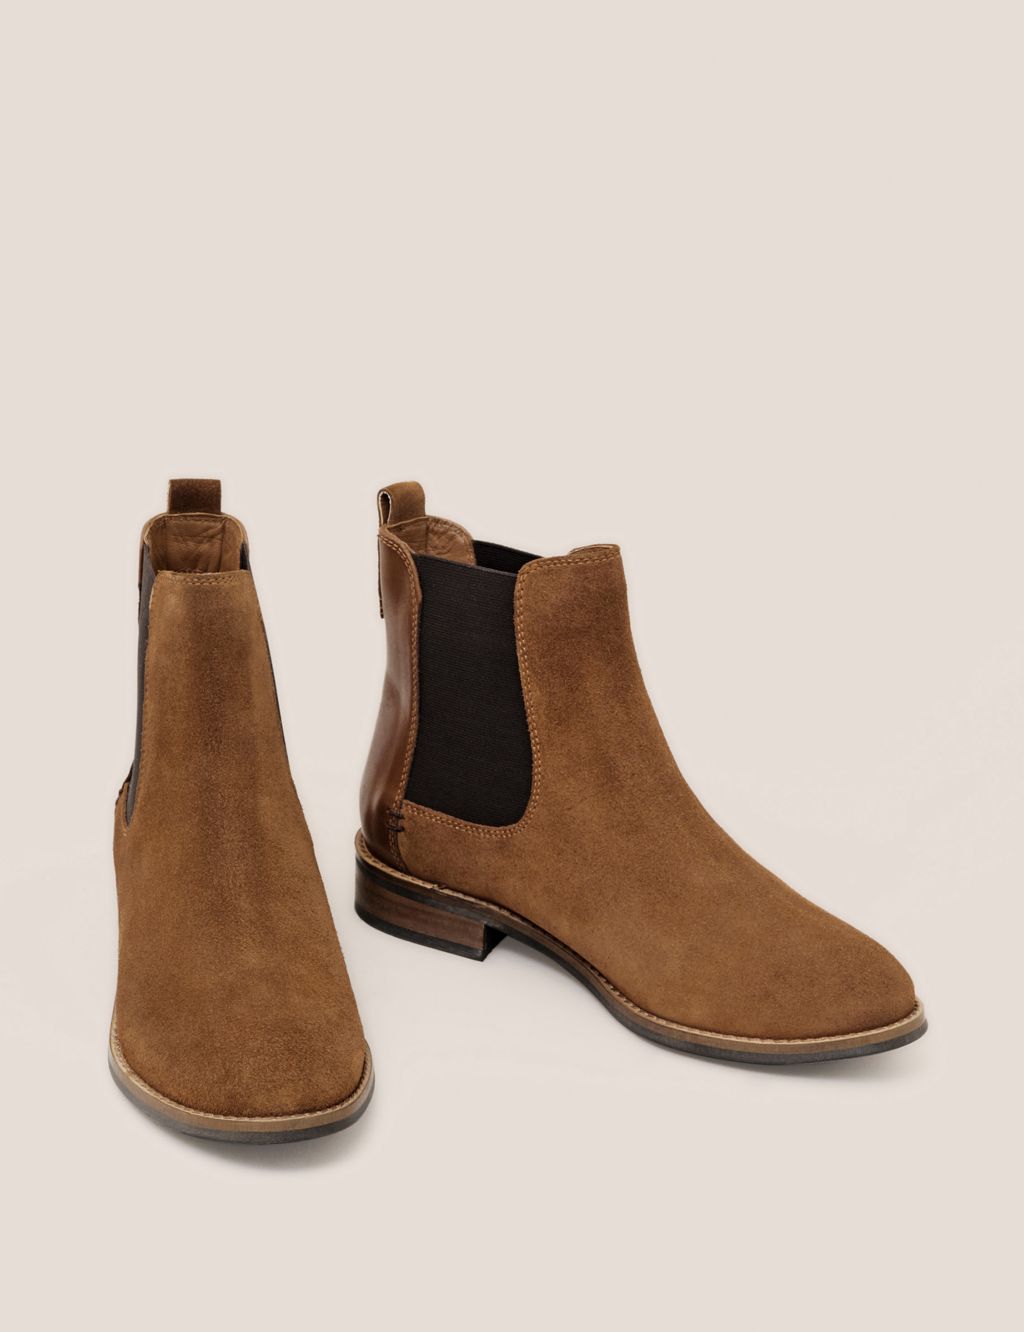 Suede Chelsea Flat Ankle Boots image 2